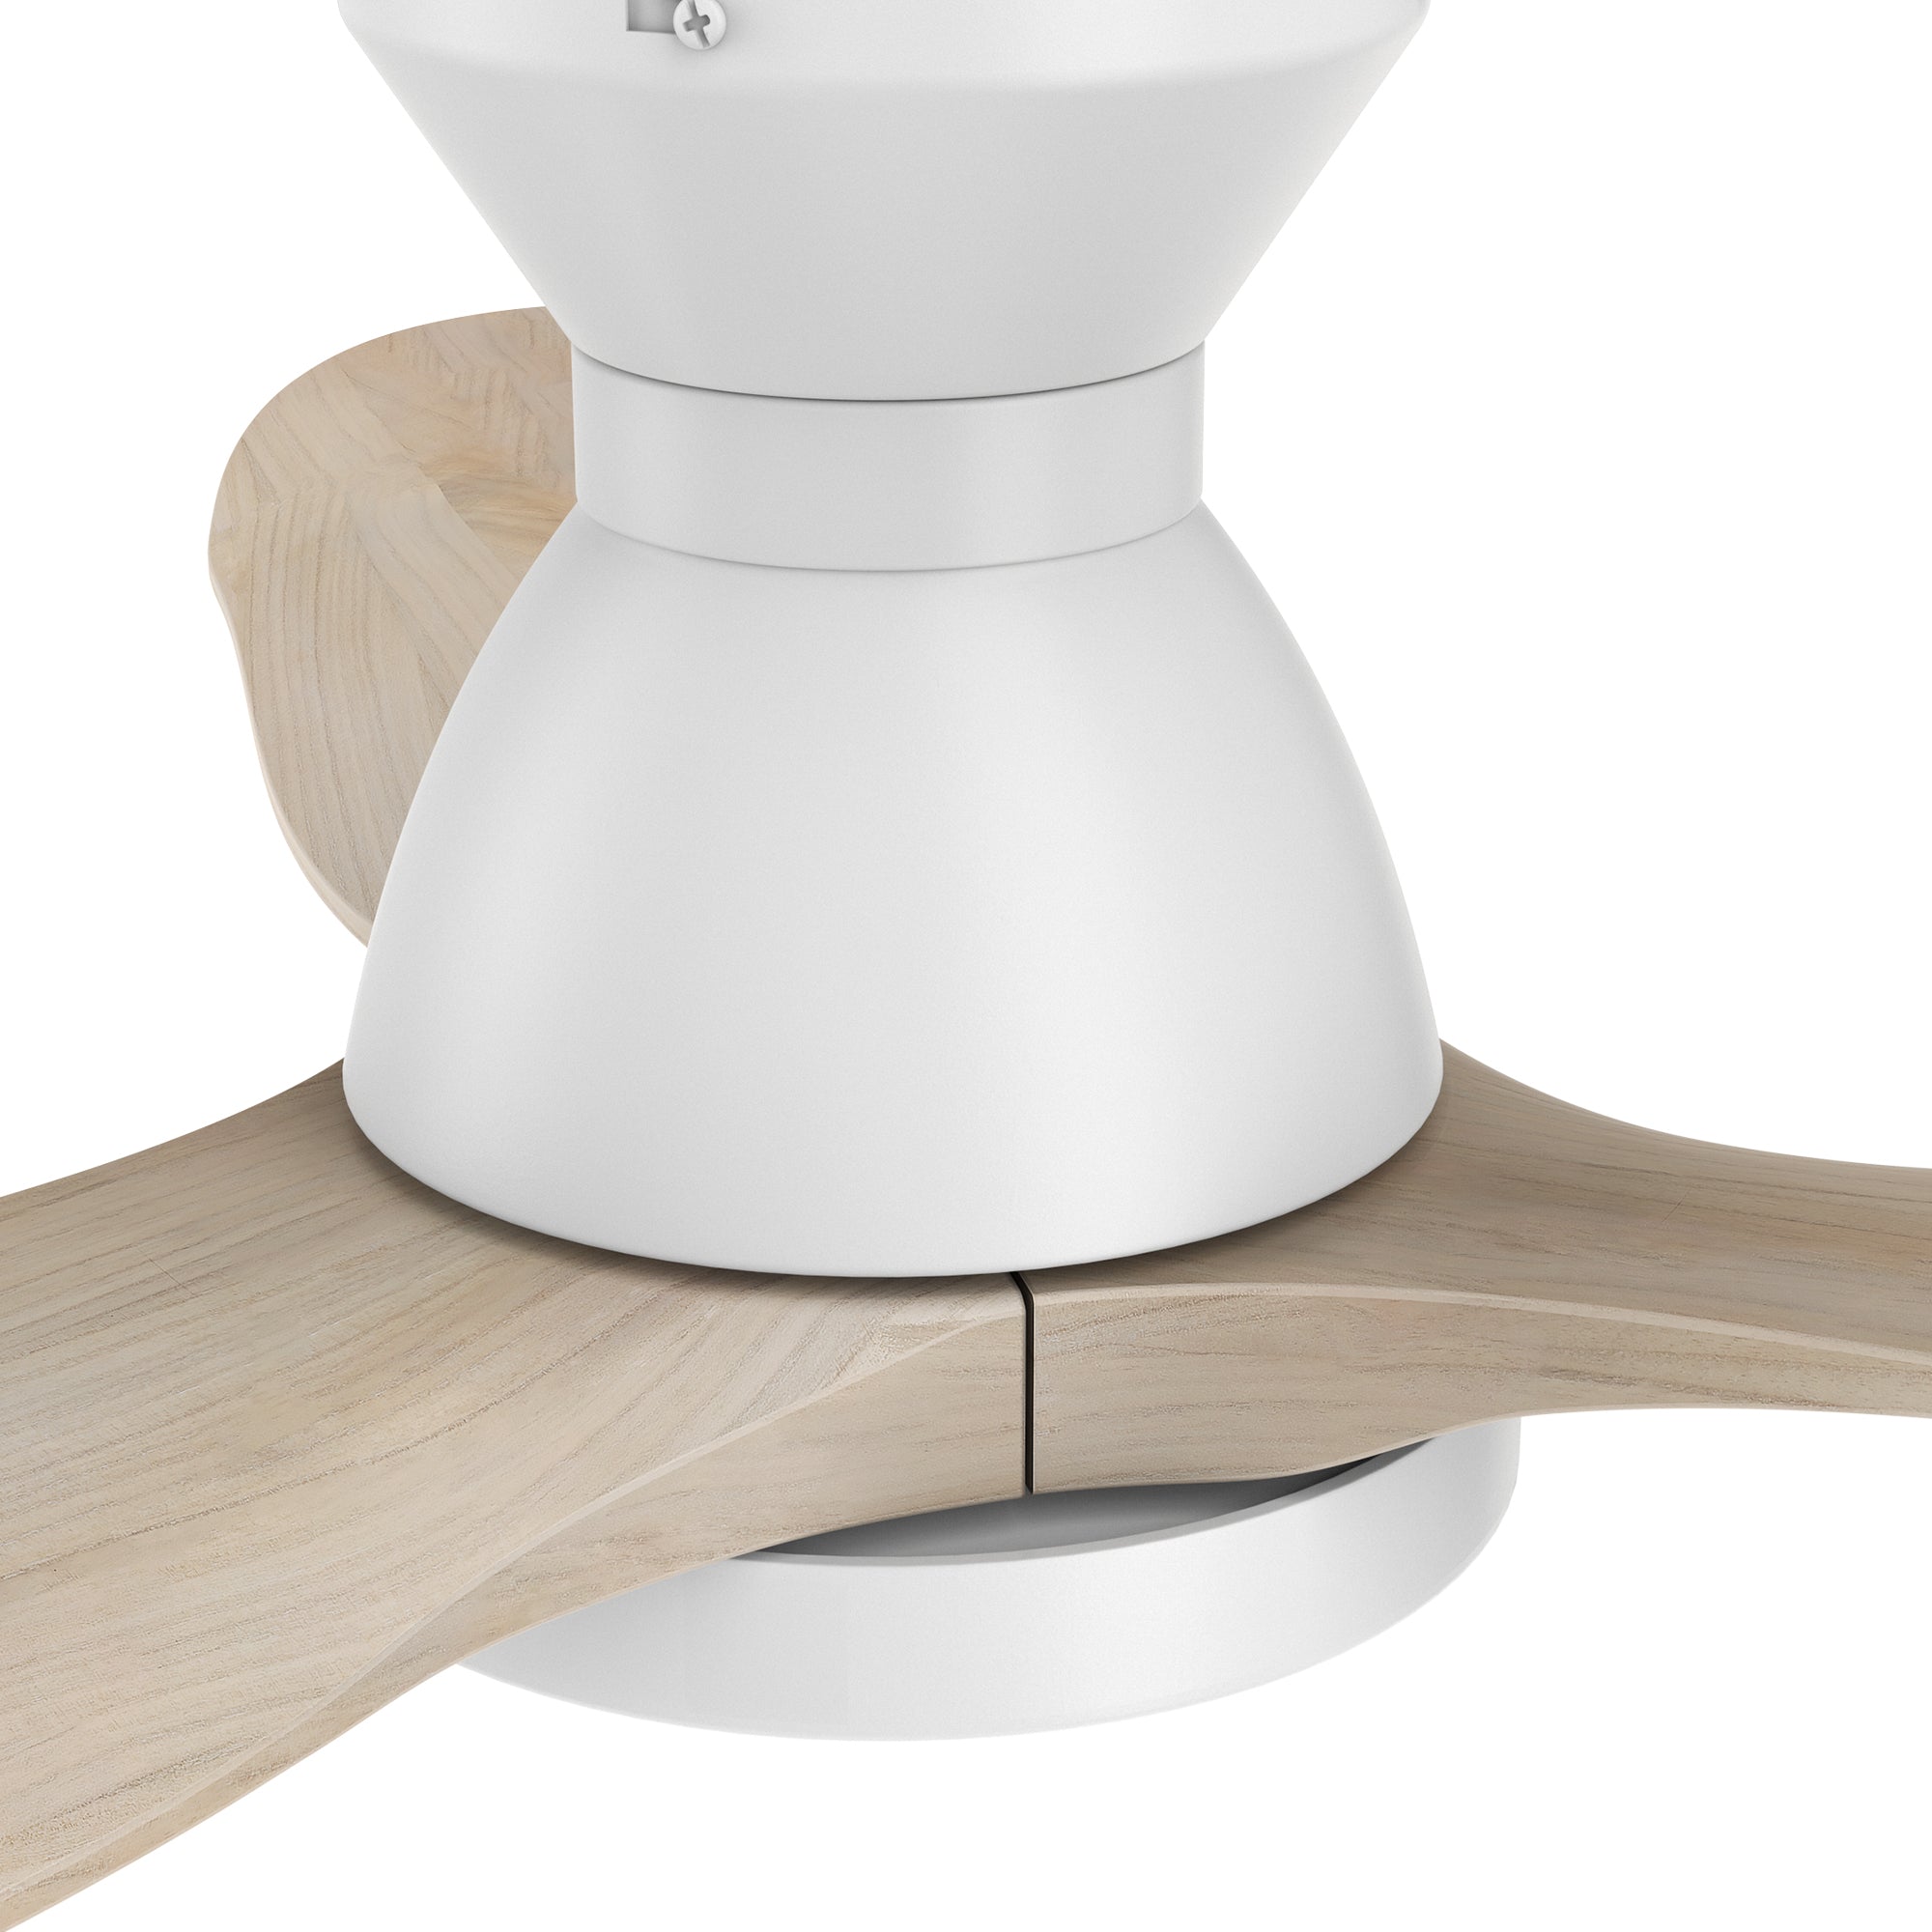 This Colmar 52&#39;&#39; smart ceiling fan keeps your space cool, bright, and stylish. It is a soft modern masterpiece perfect for your large indoor living spaces. This Wifi smart ceiling fan is a simplicity designing with White finish, use elegant Solid Wood blades and has an integrated 4000K LED cool light. The fan features Remote control, Wi-Fi apps, Siri Shortcut and Voice control technology (compatible with Amazon Alexa and Google Home Assistant ) to set fan preferences. 